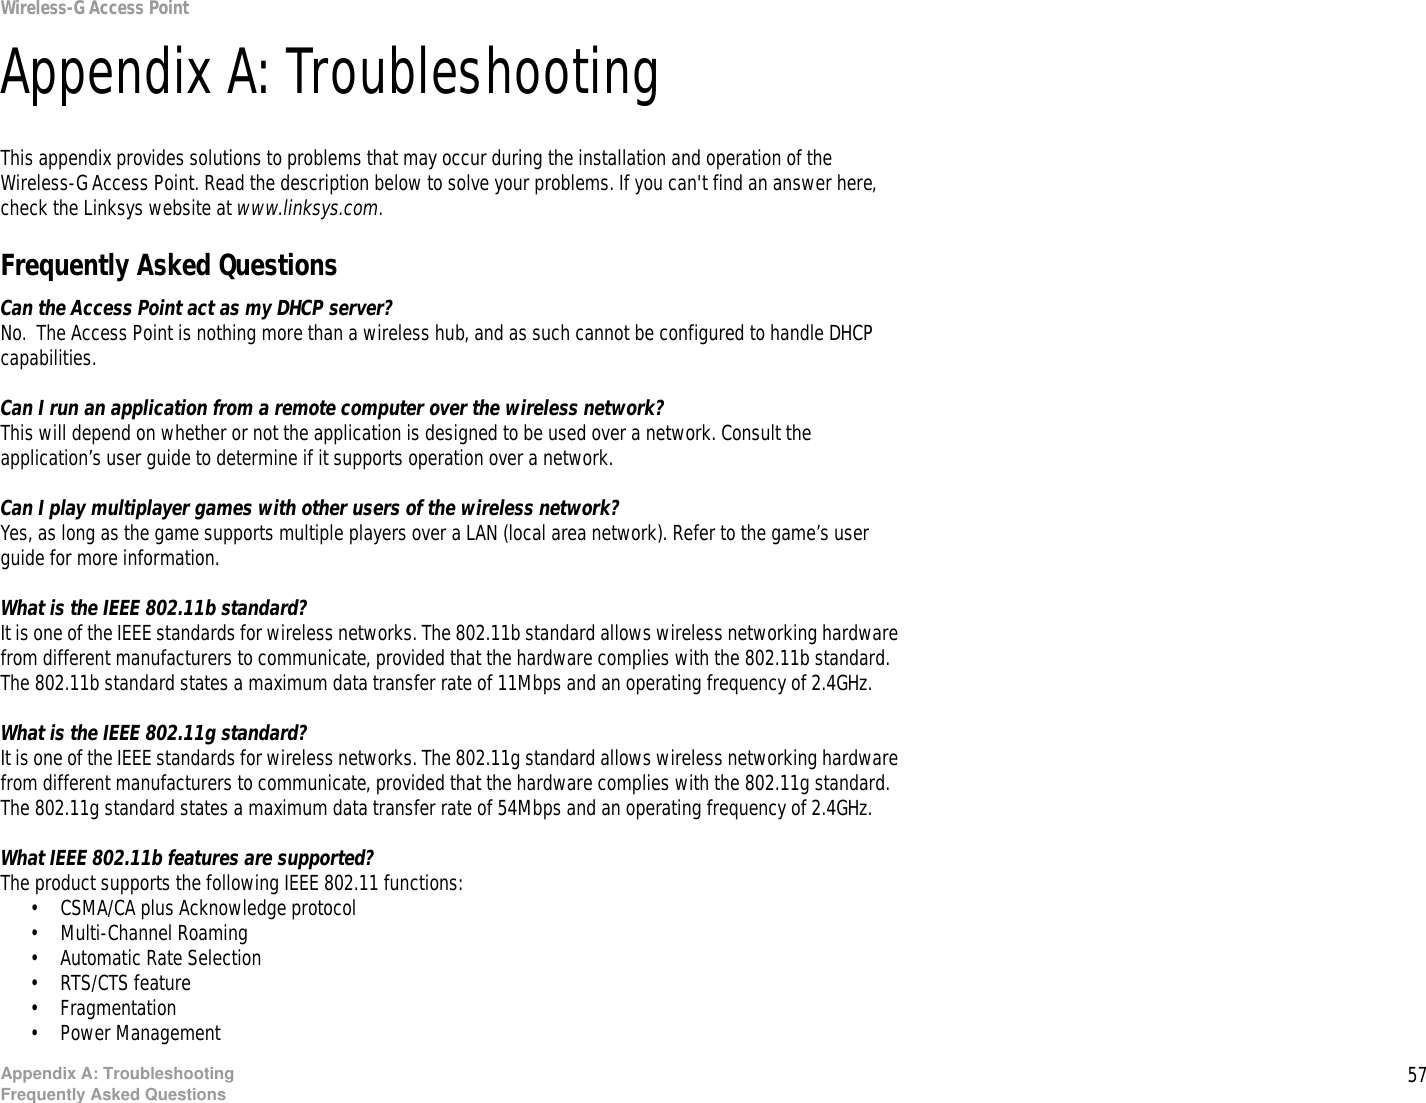 57Appendix A: TroubleshootingFrequently Asked QuestionsWireless-G Access PointAppendix A: TroubleshootingThis appendix provides solutions to problems that may occur during the installation and operation of the Wireless-G Access Point. Read the description below to solve your problems. If you can&apos;t find an answer here, check the Linksys website at www.linksys.com.Frequently Asked QuestionsCan the Access Point act as my DHCP server?No.  The Access Point is nothing more than a wireless hub, and as such cannot be configured to handle DHCP capabilities.Can I run an application from a remote computer over the wireless network?This will depend on whether or not the application is designed to be used over a network. Consult the application’s user guide to determine if it supports operation over a network.Can I play multiplayer games with other users of the wireless network?Yes, as long as the game supports multiple players over a LAN (local area network). Refer to the game’s user guide for more information.What is the IEEE 802.11b standard?It is one of the IEEE standards for wireless networks. The 802.11b standard allows wireless networking hardware from different manufacturers to communicate, provided that the hardware complies with the 802.11b standard. The 802.11b standard states a maximum data transfer rate of 11Mbps and an operating frequency of 2.4GHz.What is the IEEE 802.11g standard?It is one of the IEEE standards for wireless networks. The 802.11g standard allows wireless networking hardware from different manufacturers to communicate, provided that the hardware complies with the 802.11g standard. The 802.11g standard states a maximum data transfer rate of 54Mbps and an operating frequency of 2.4GHz.What IEEE 802.11b features are supported?The product supports the following IEEE 802.11 functions: • CSMA/CA plus Acknowledge protocol • Multi-Channel Roaming • Automatic Rate Selection • RTS/CTS feature • Fragmentation • Power Management  